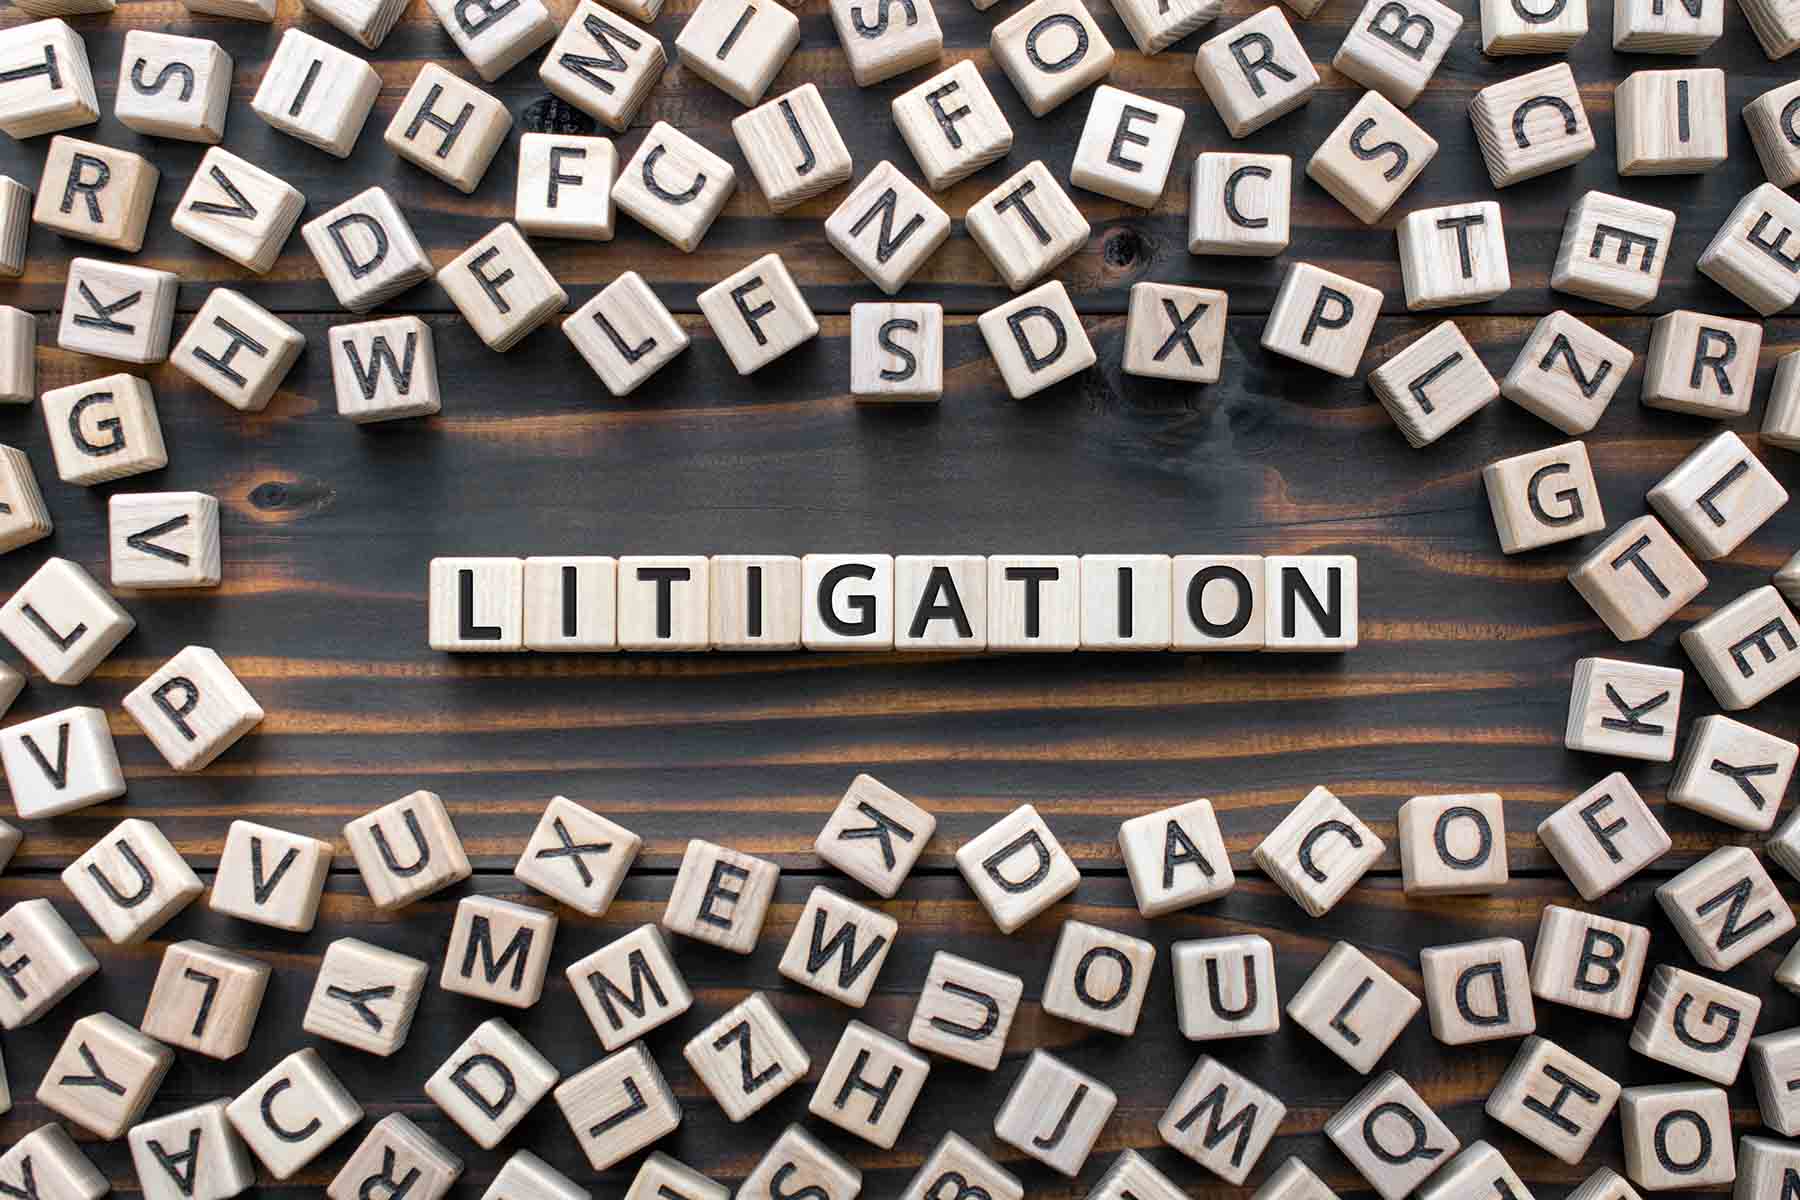 litigation - word from wooden blocks with letters, the process determining issues a court Arbitration and Litigation concept, random letters around, top view on wooden background